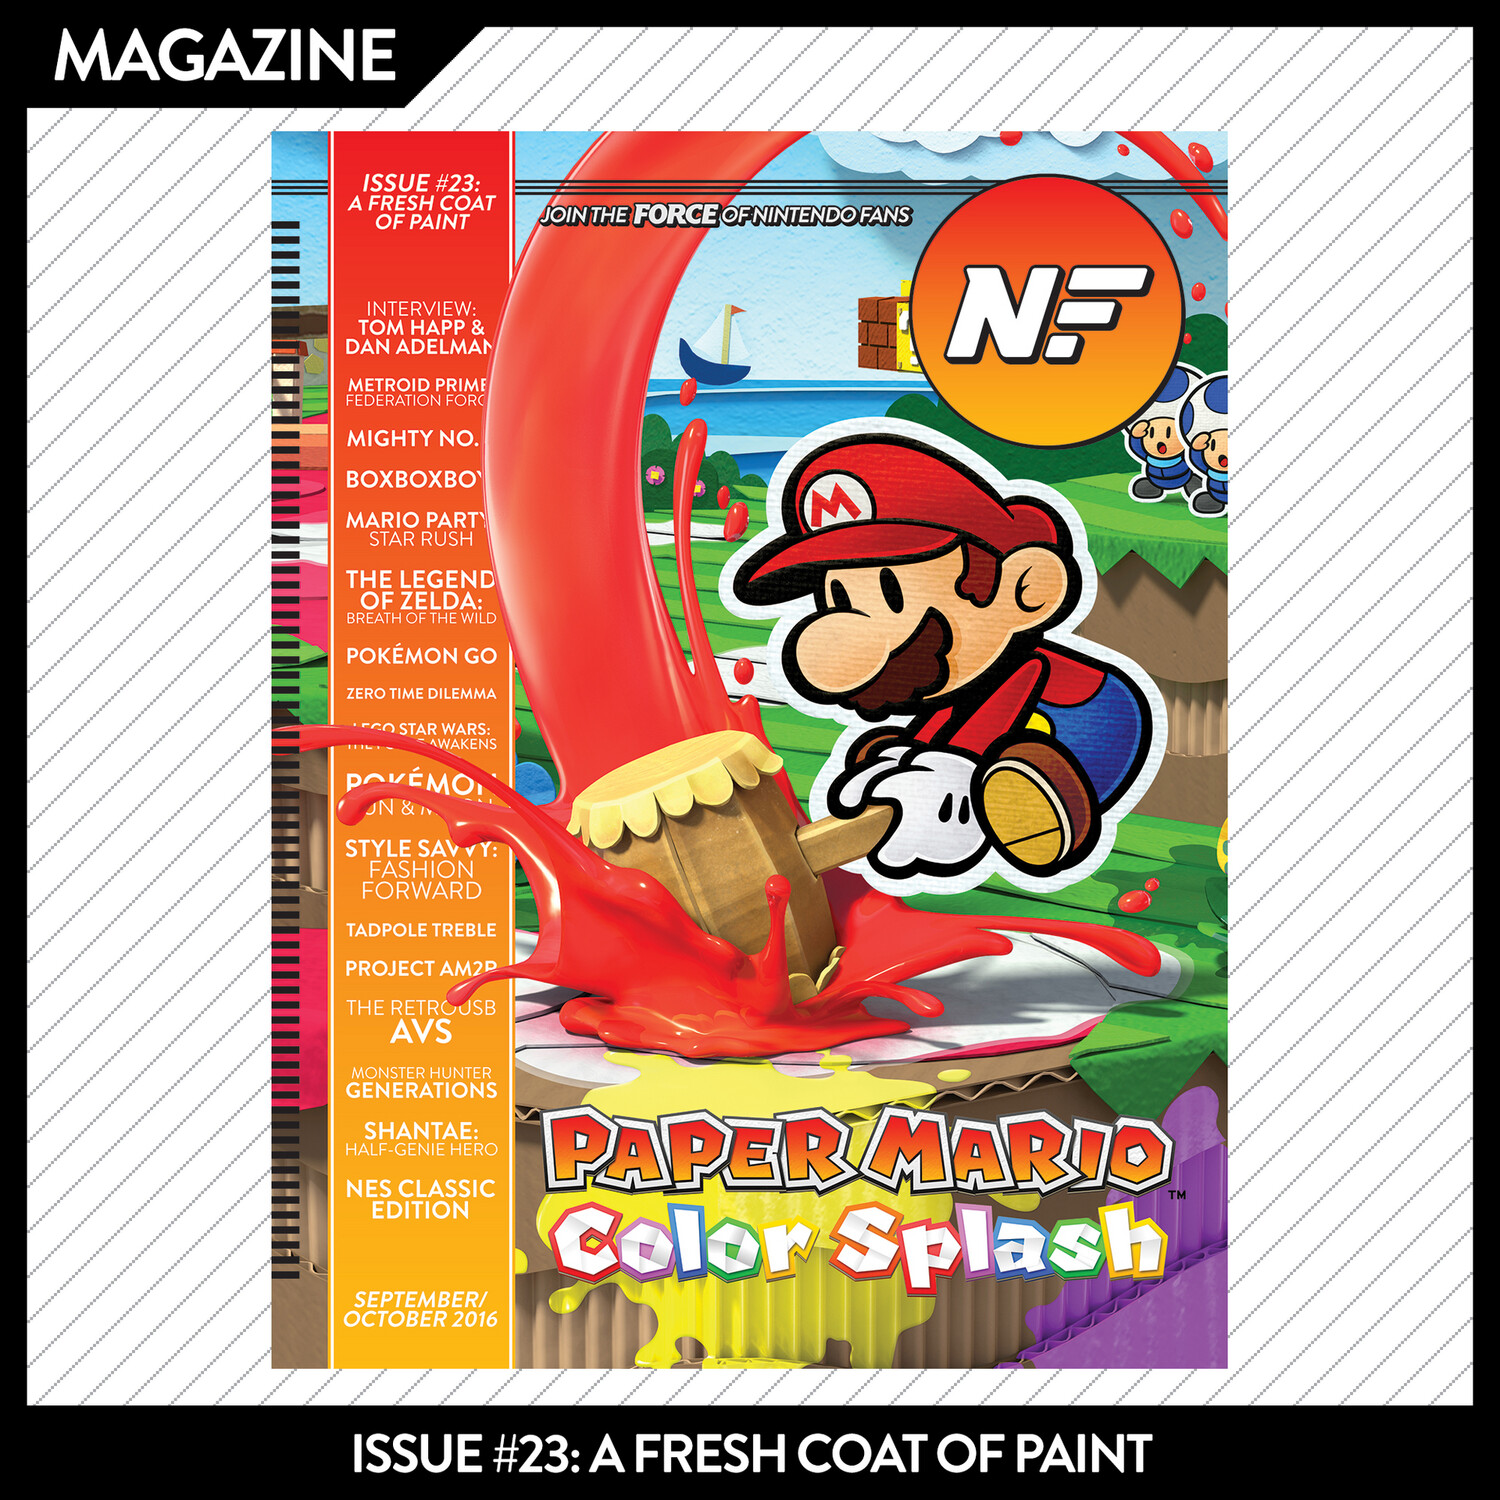 Issue #23: A Fresh Coat of Paint – September/October 2016